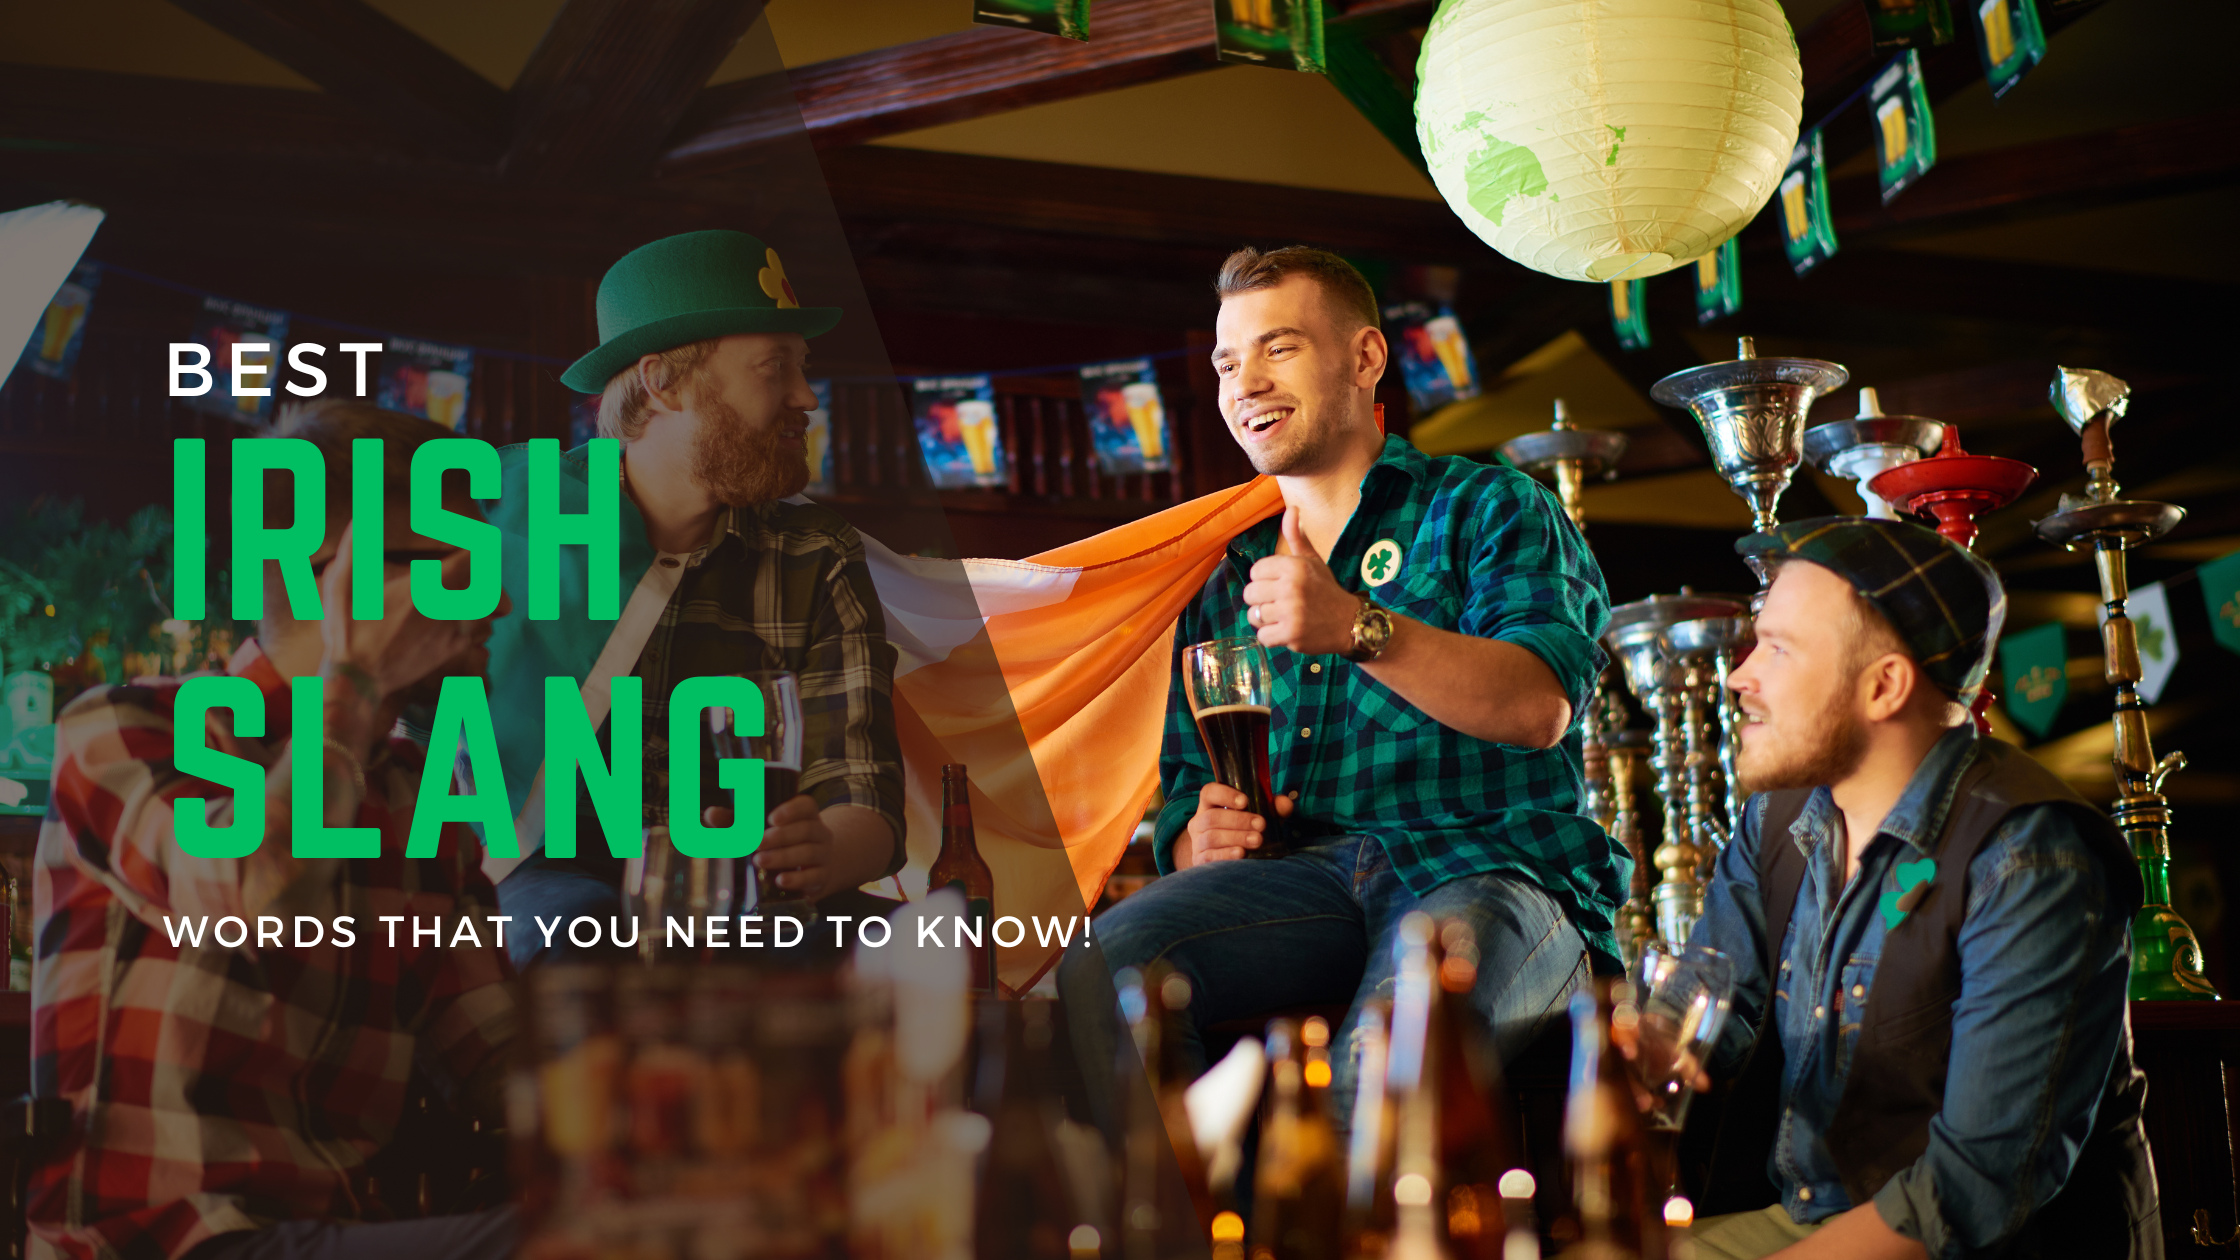 Best Irish Slang words you need to know